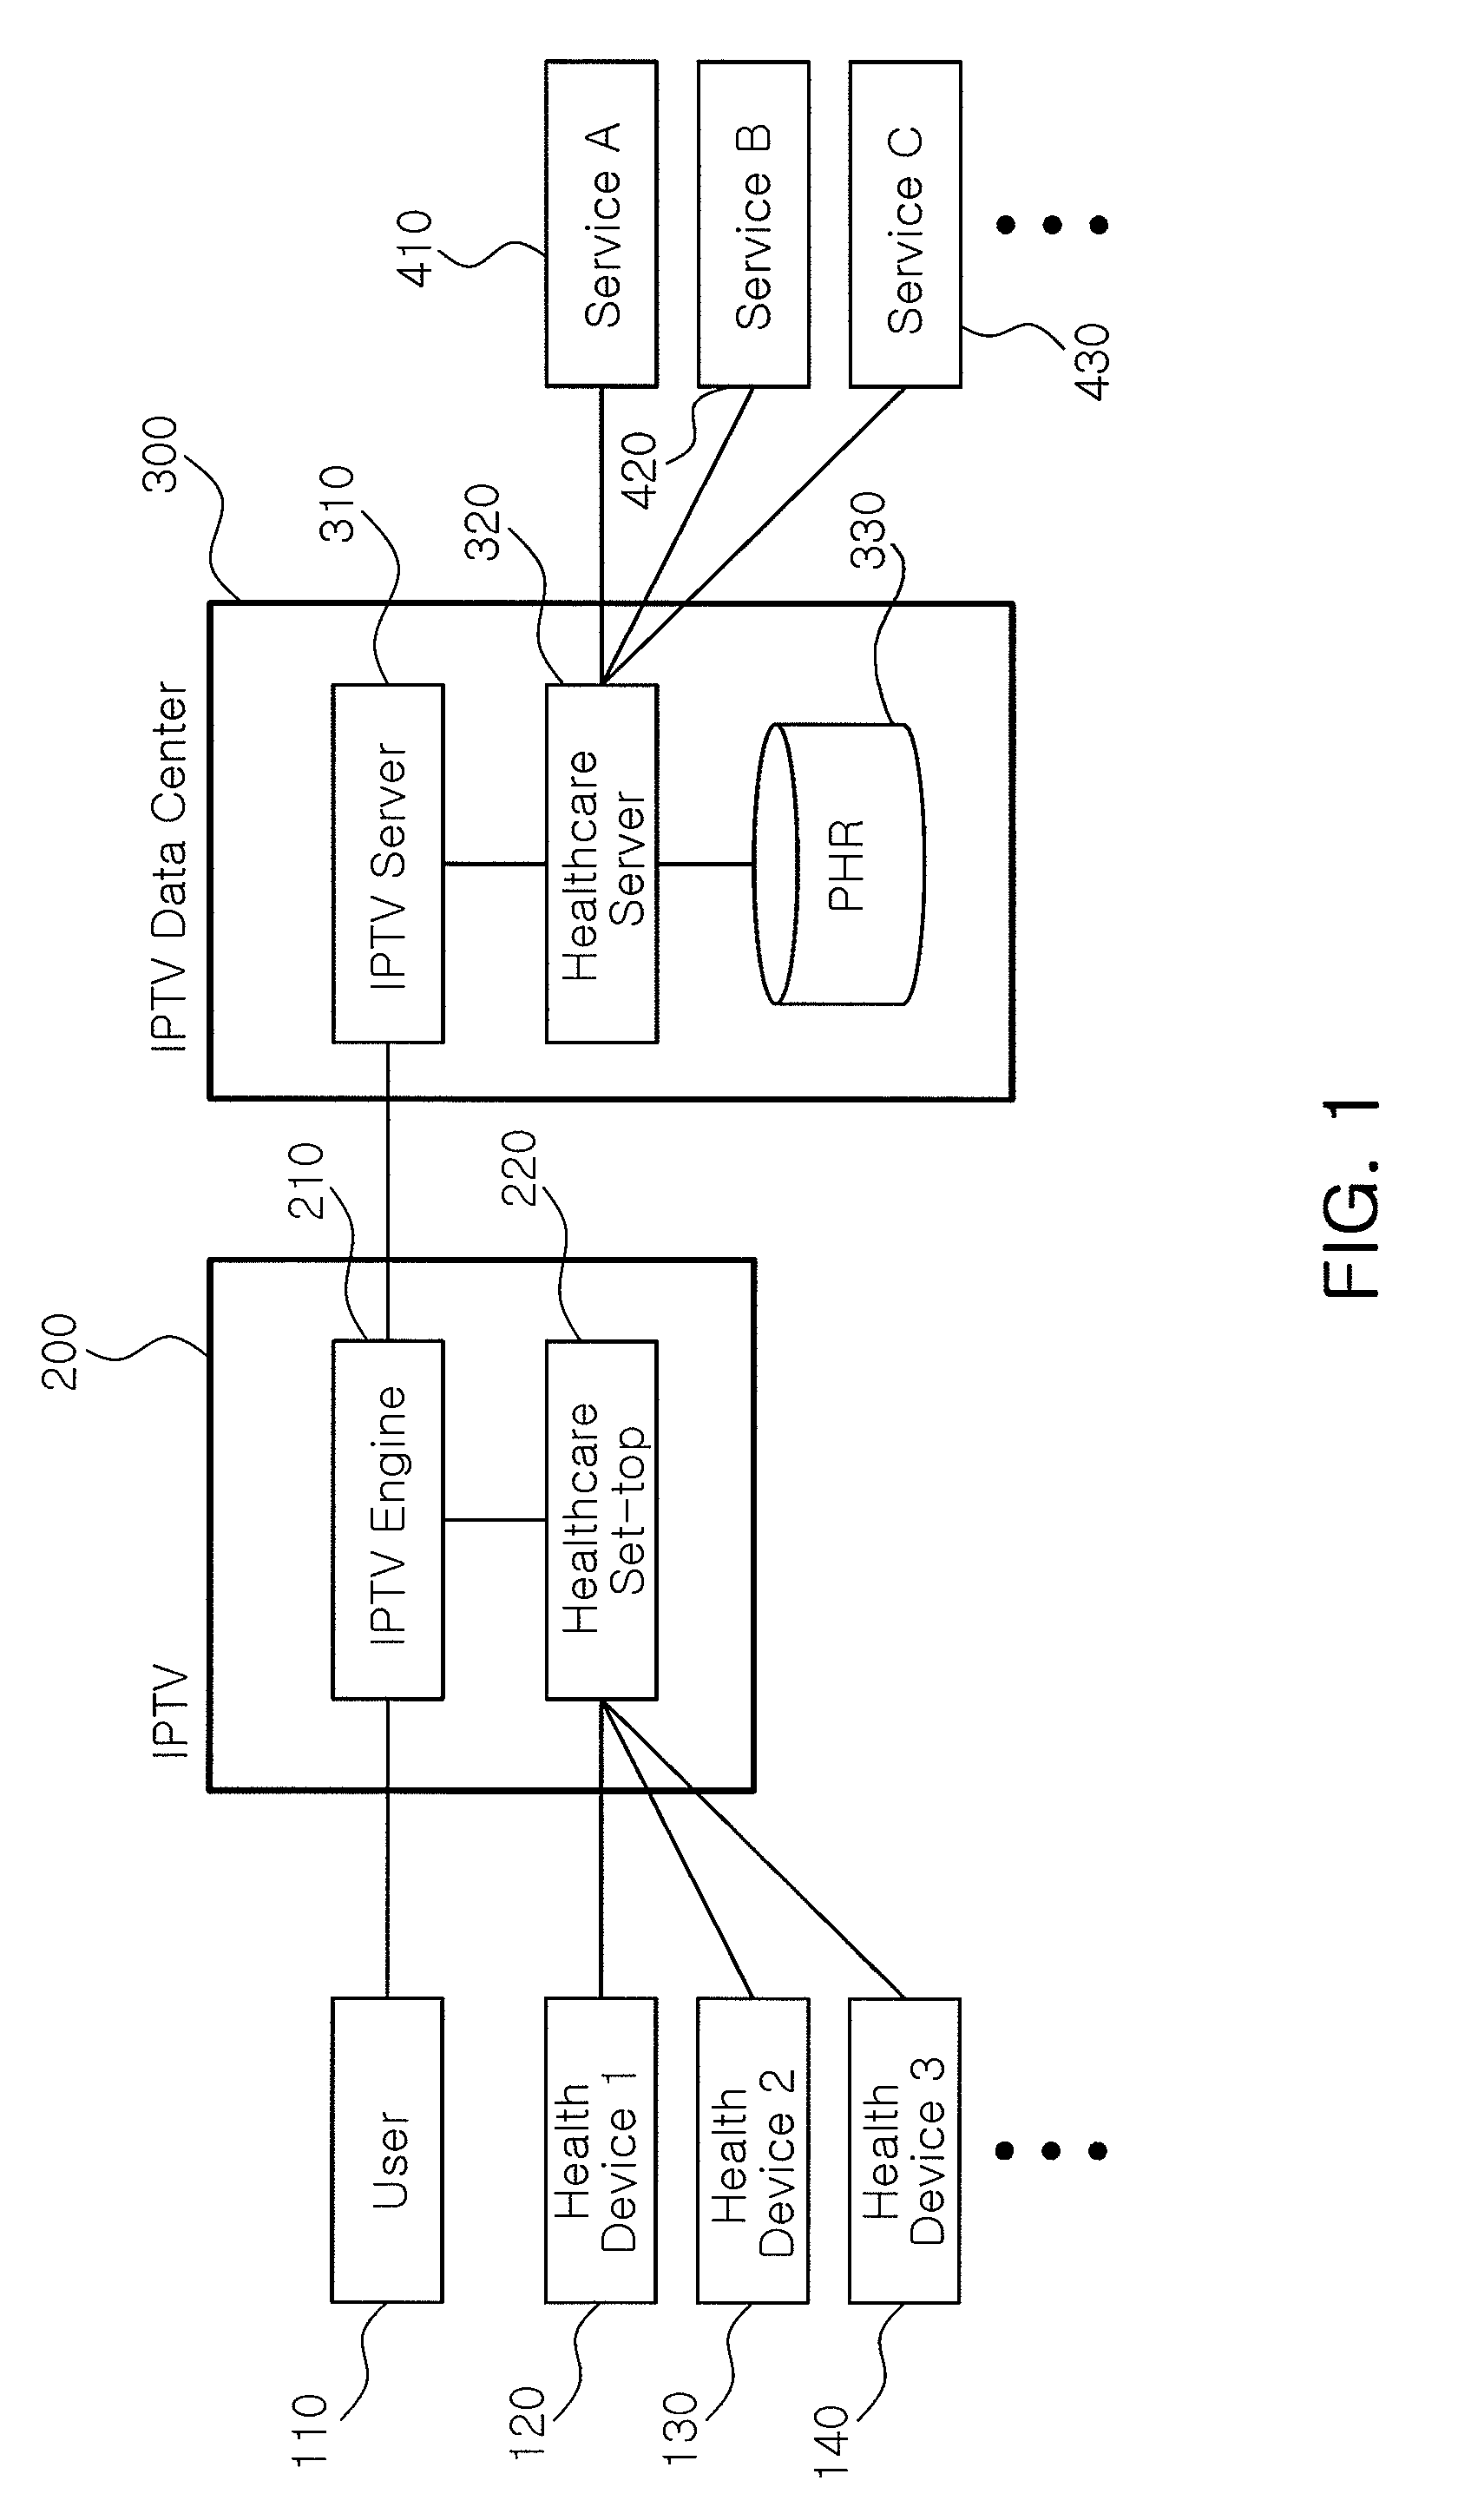 System and method for providing healthcare services based on internet protocol television